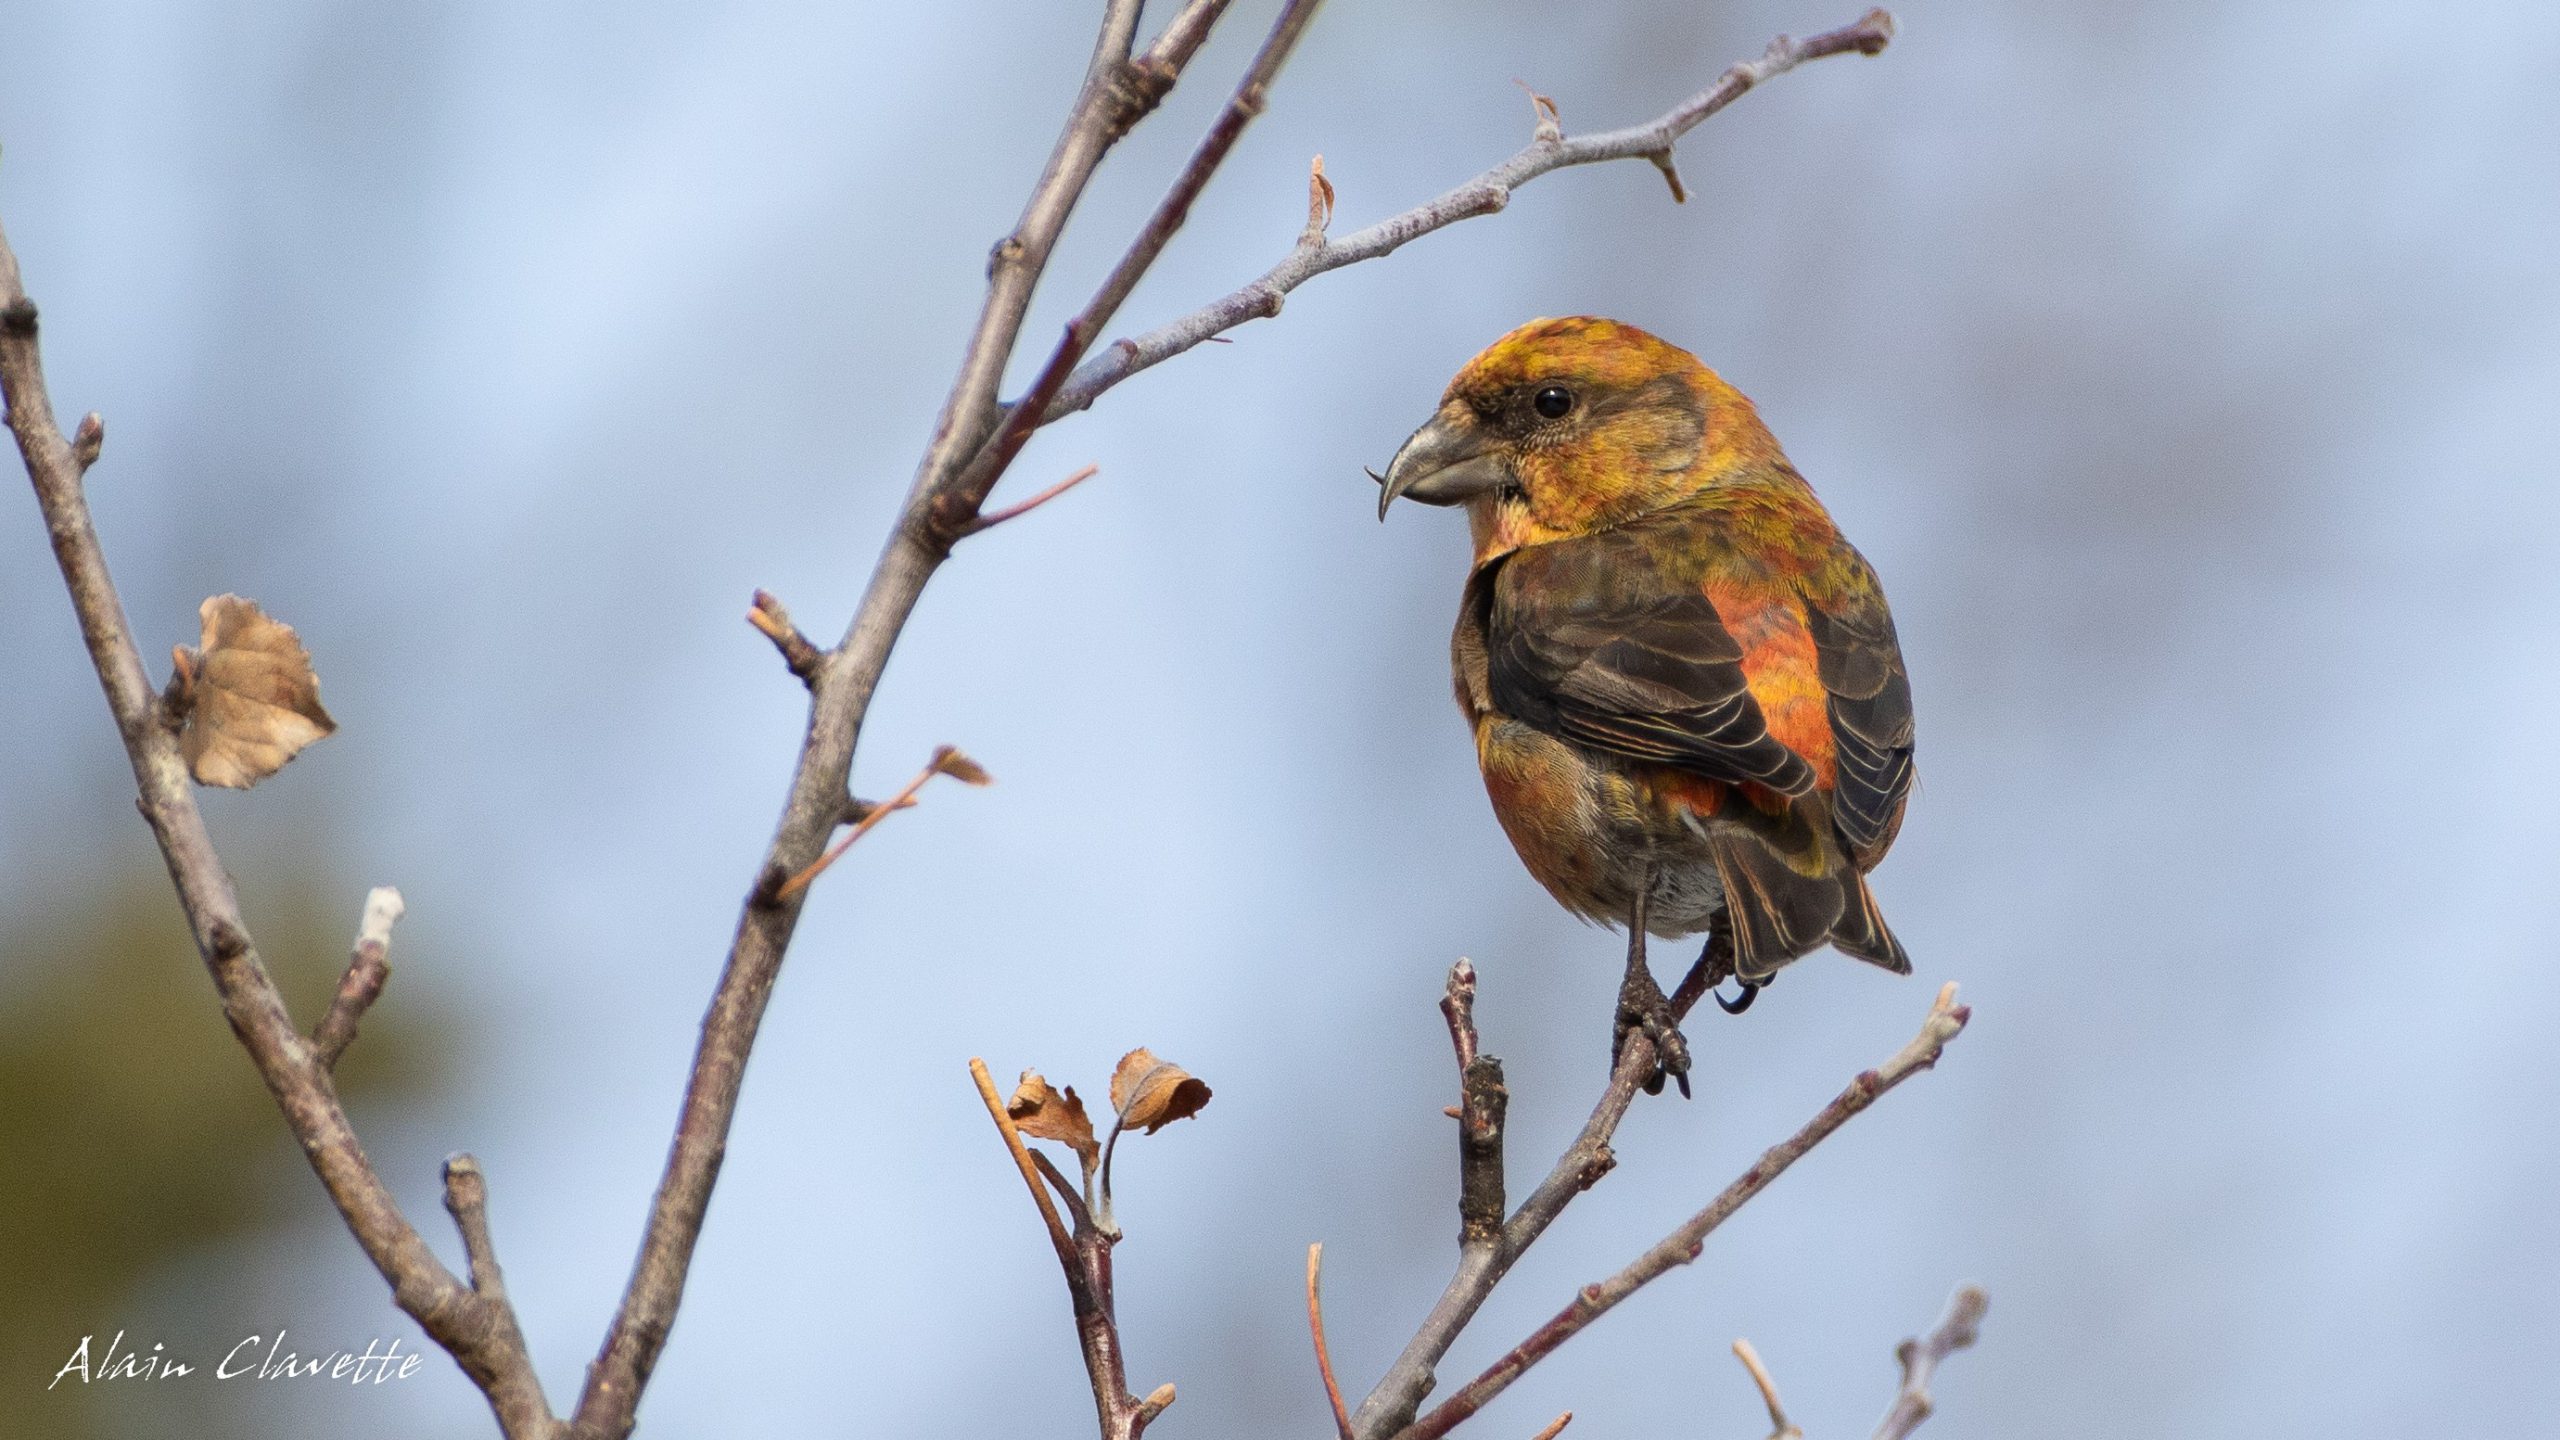 A male Red Crossbill showing its namesake crossed bill